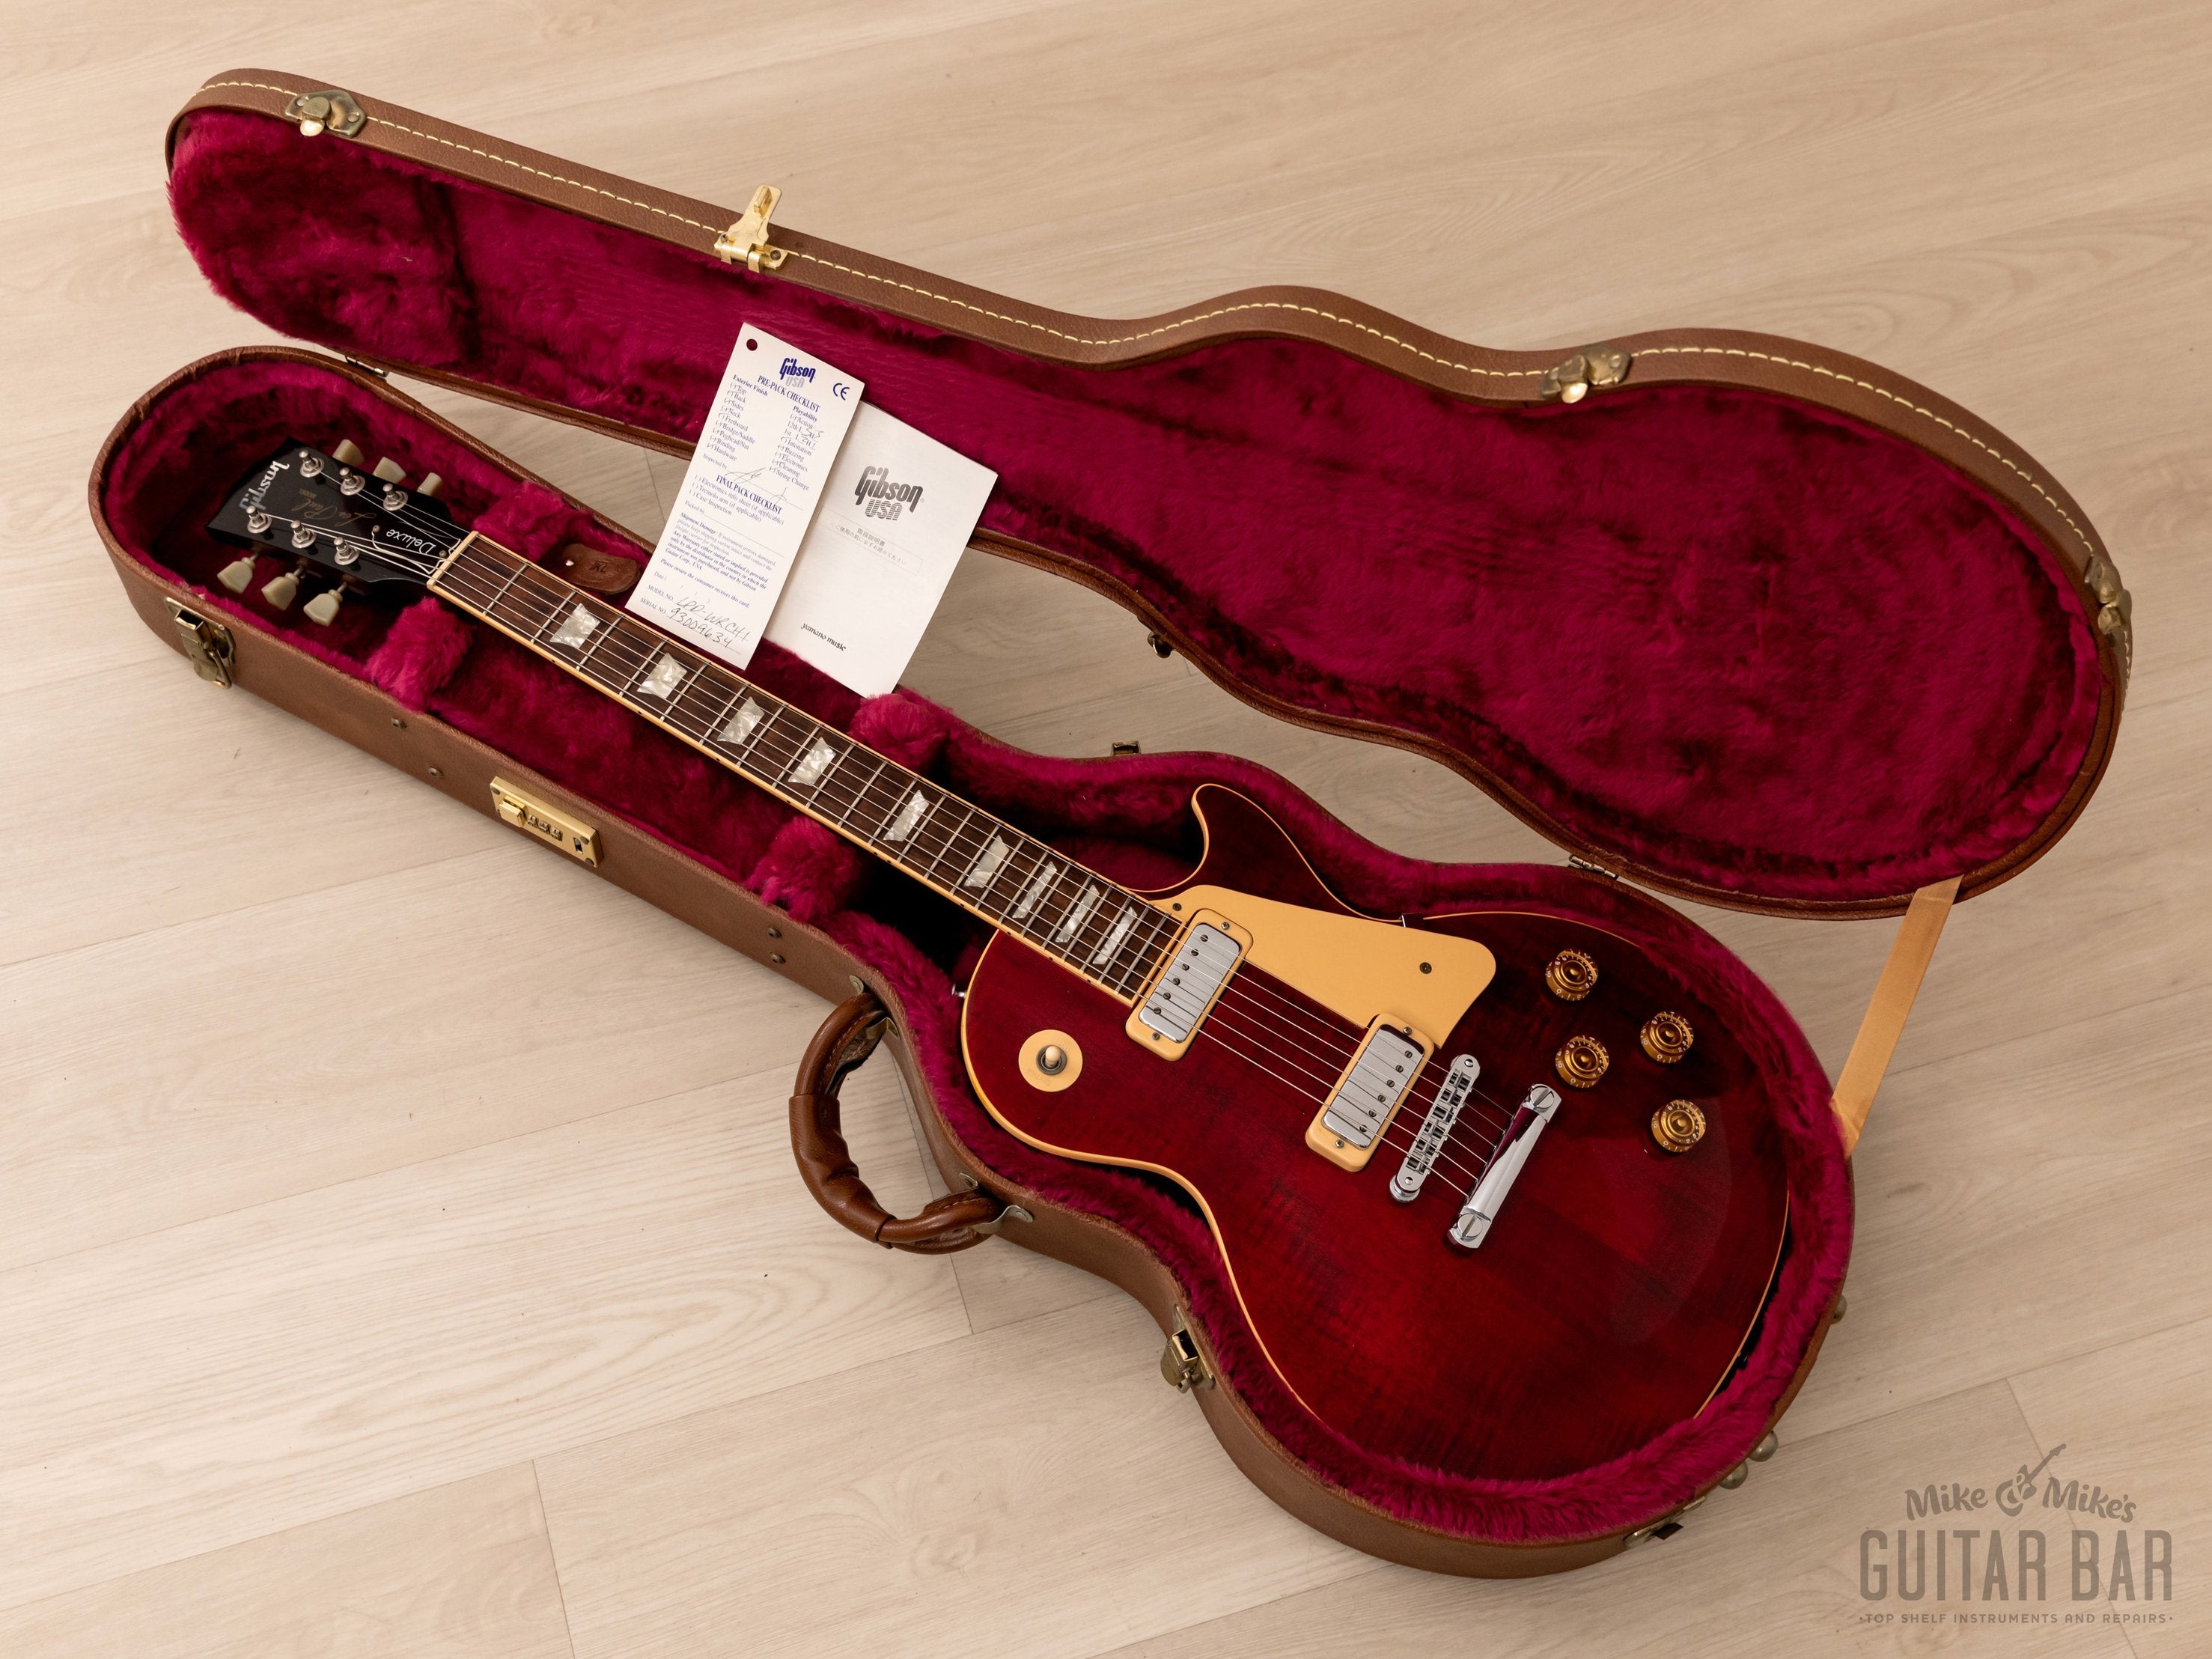 1999 Gibson Les Paul Deluxe Limited Edition Wine Red w/ Case & Hangtags, Yamano